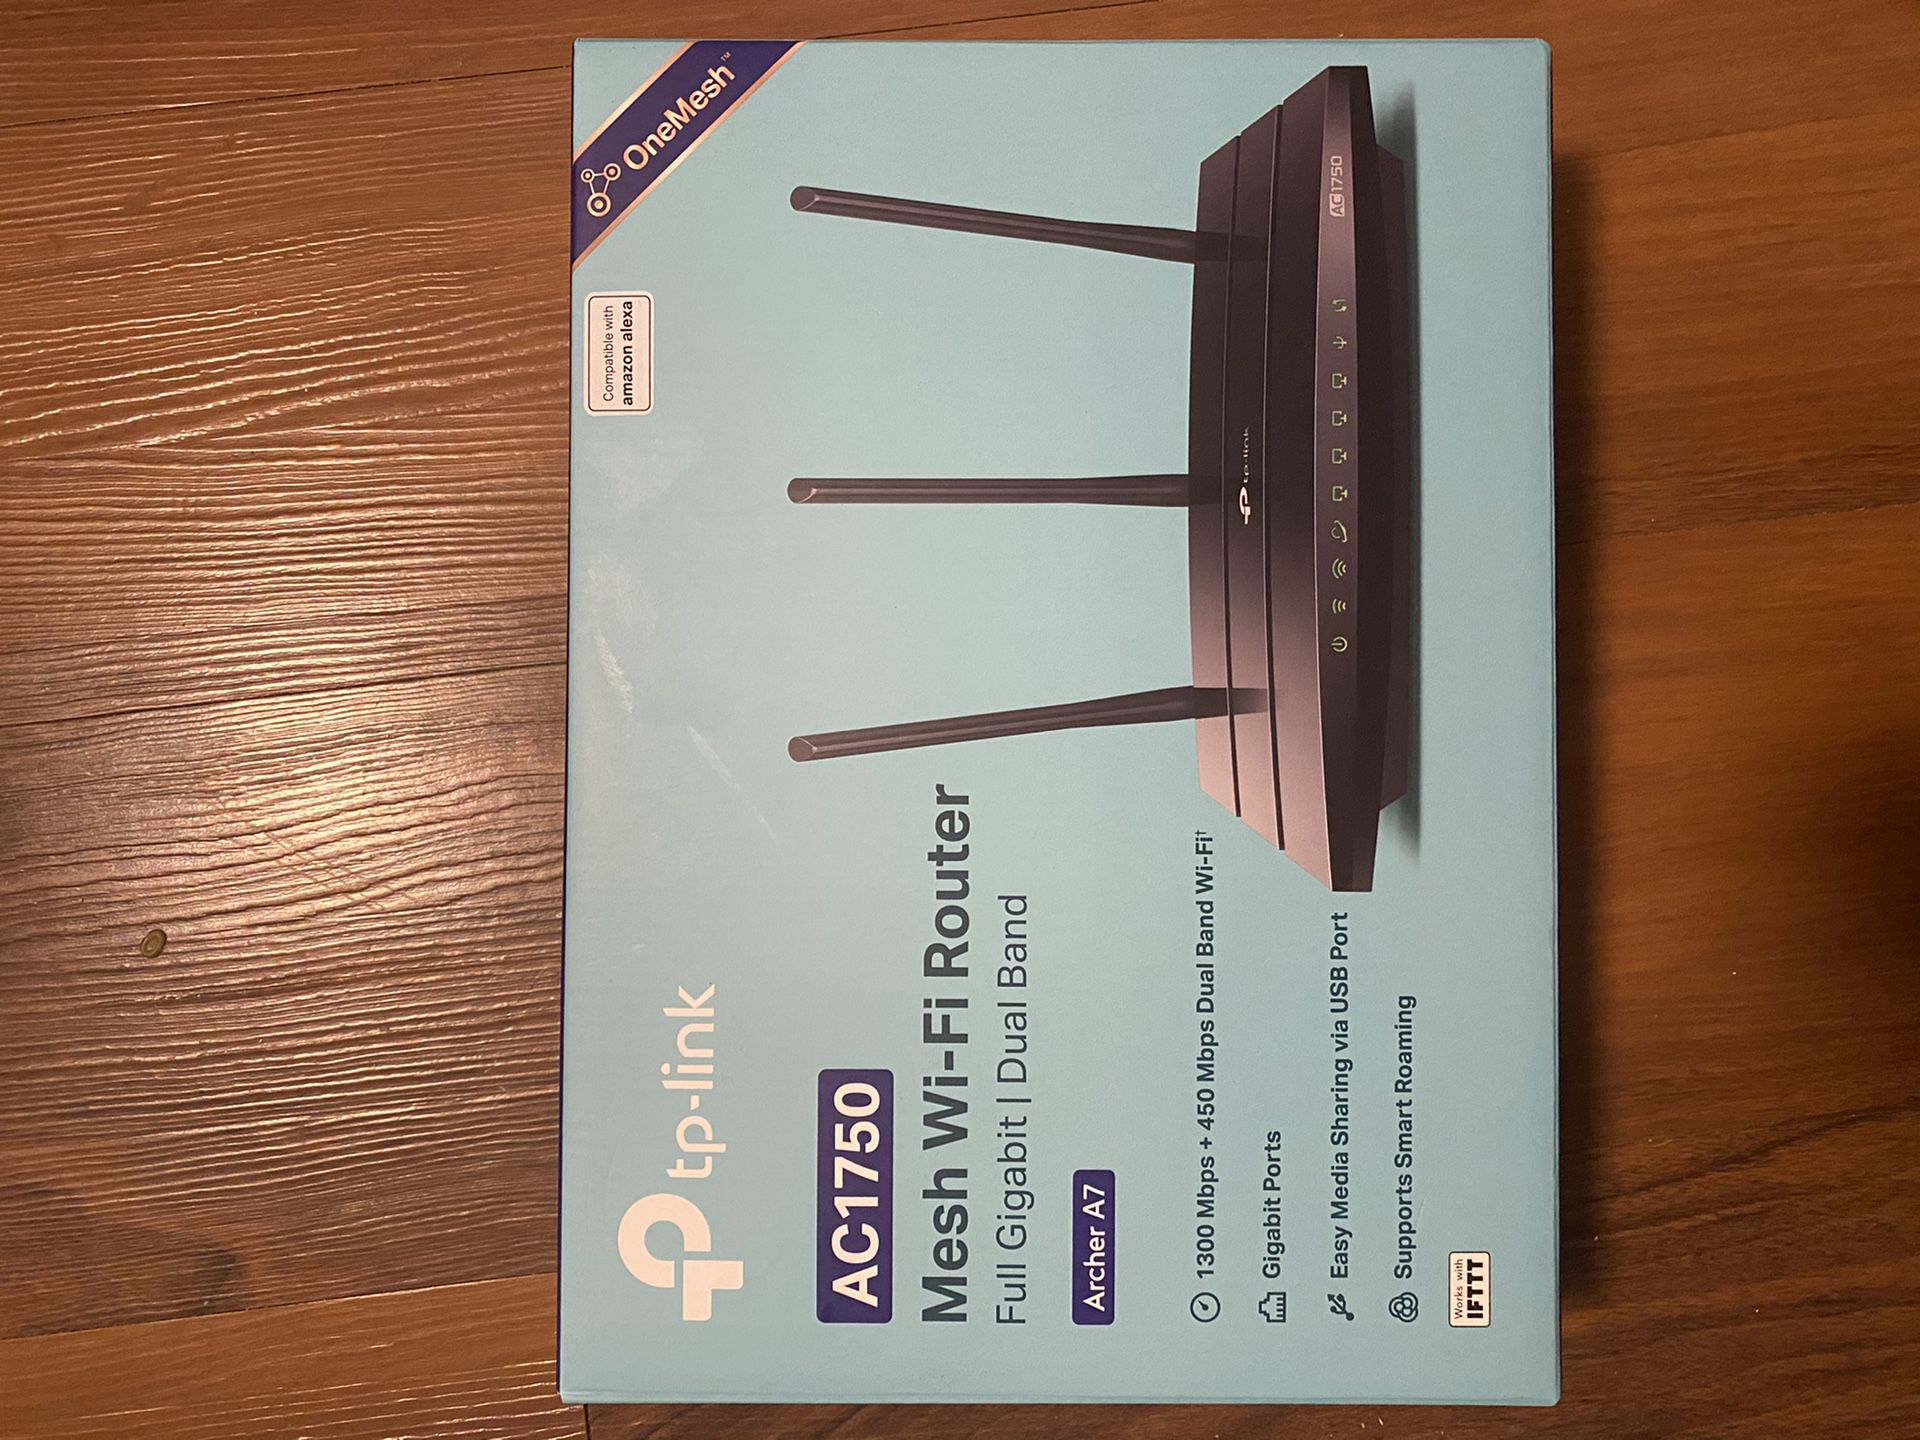 Wifi router ac 1750